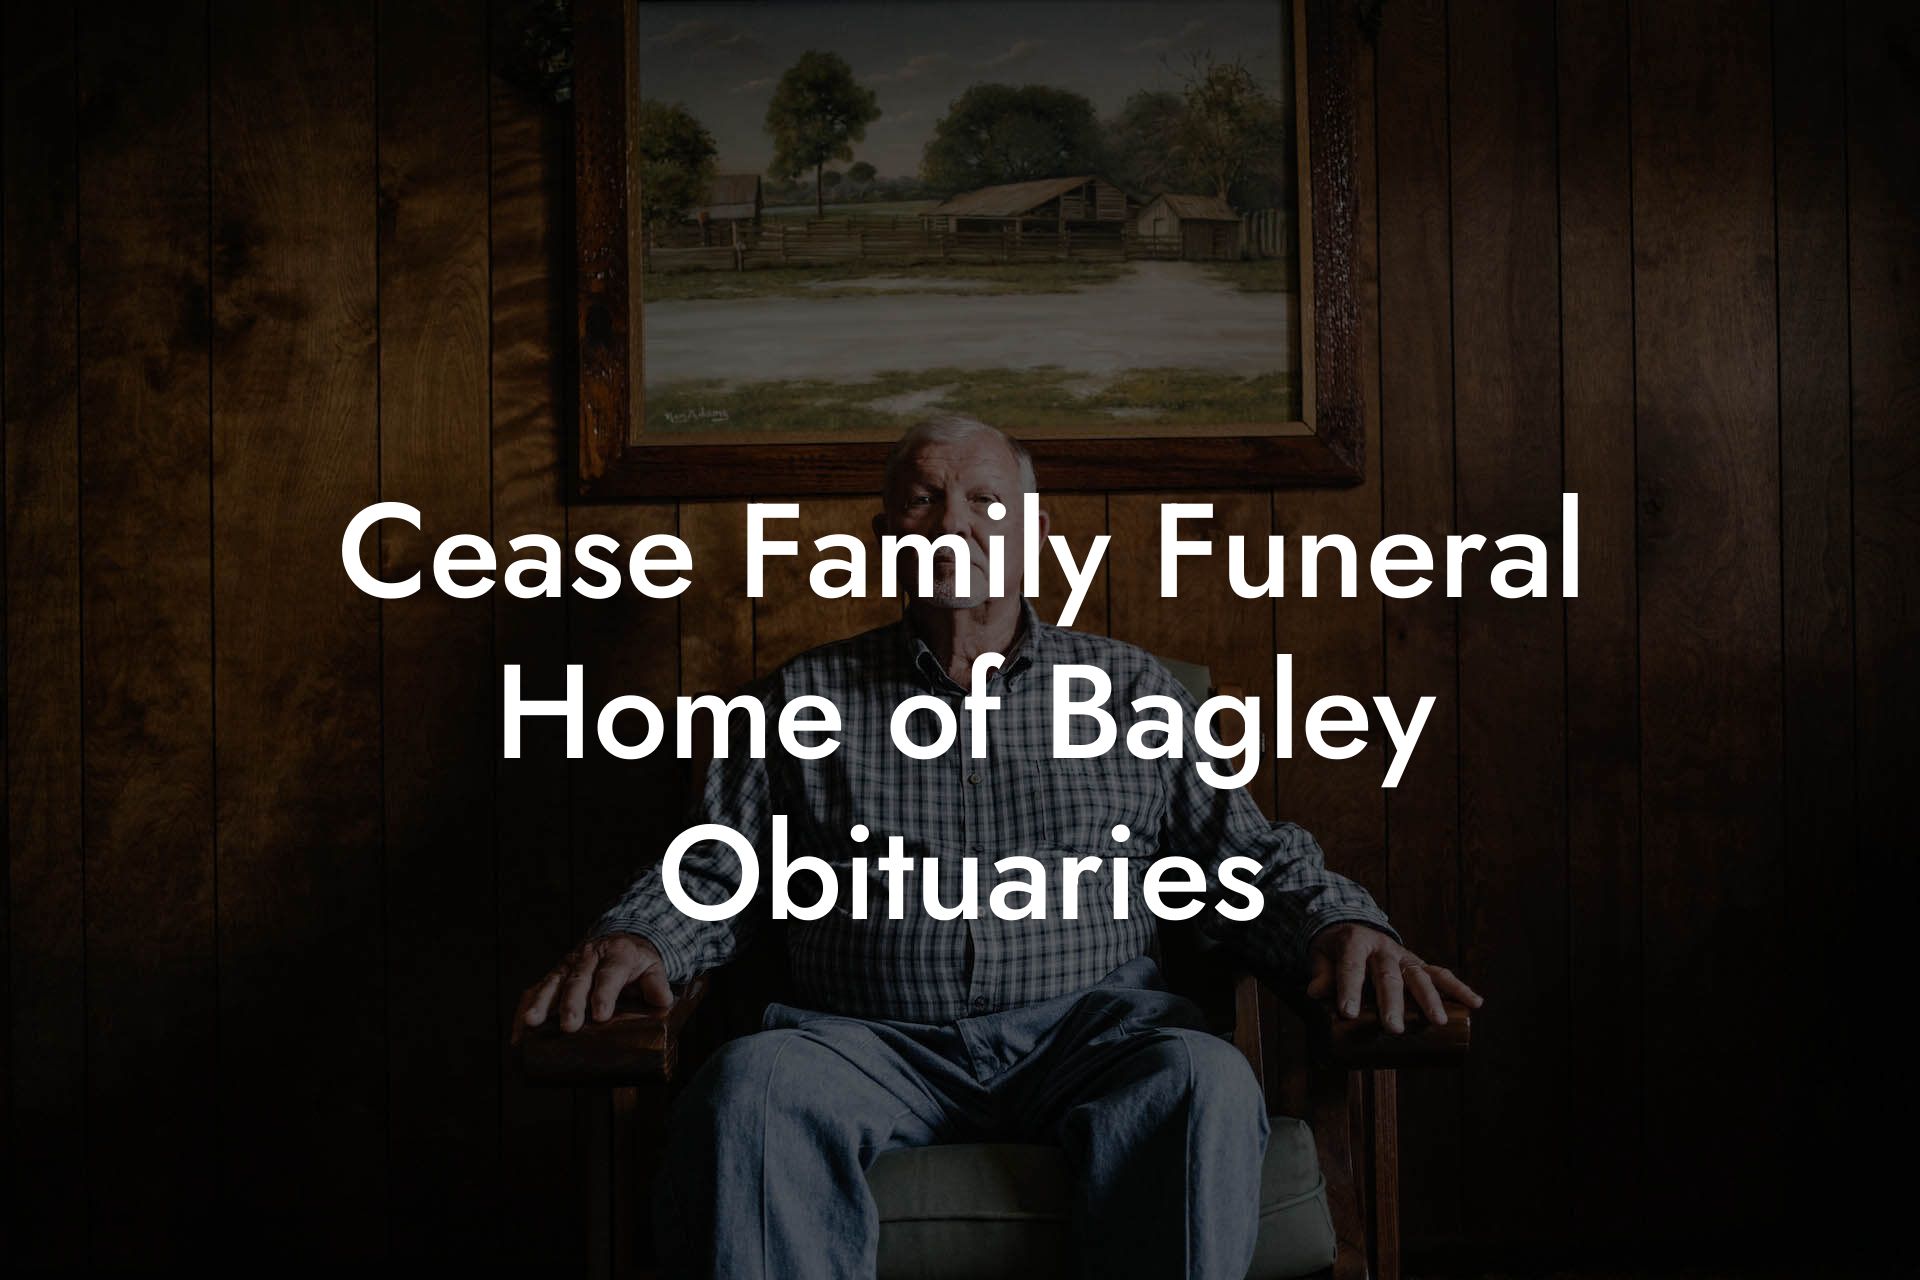 Cease Family Funeral Home of Bagley Obituaries